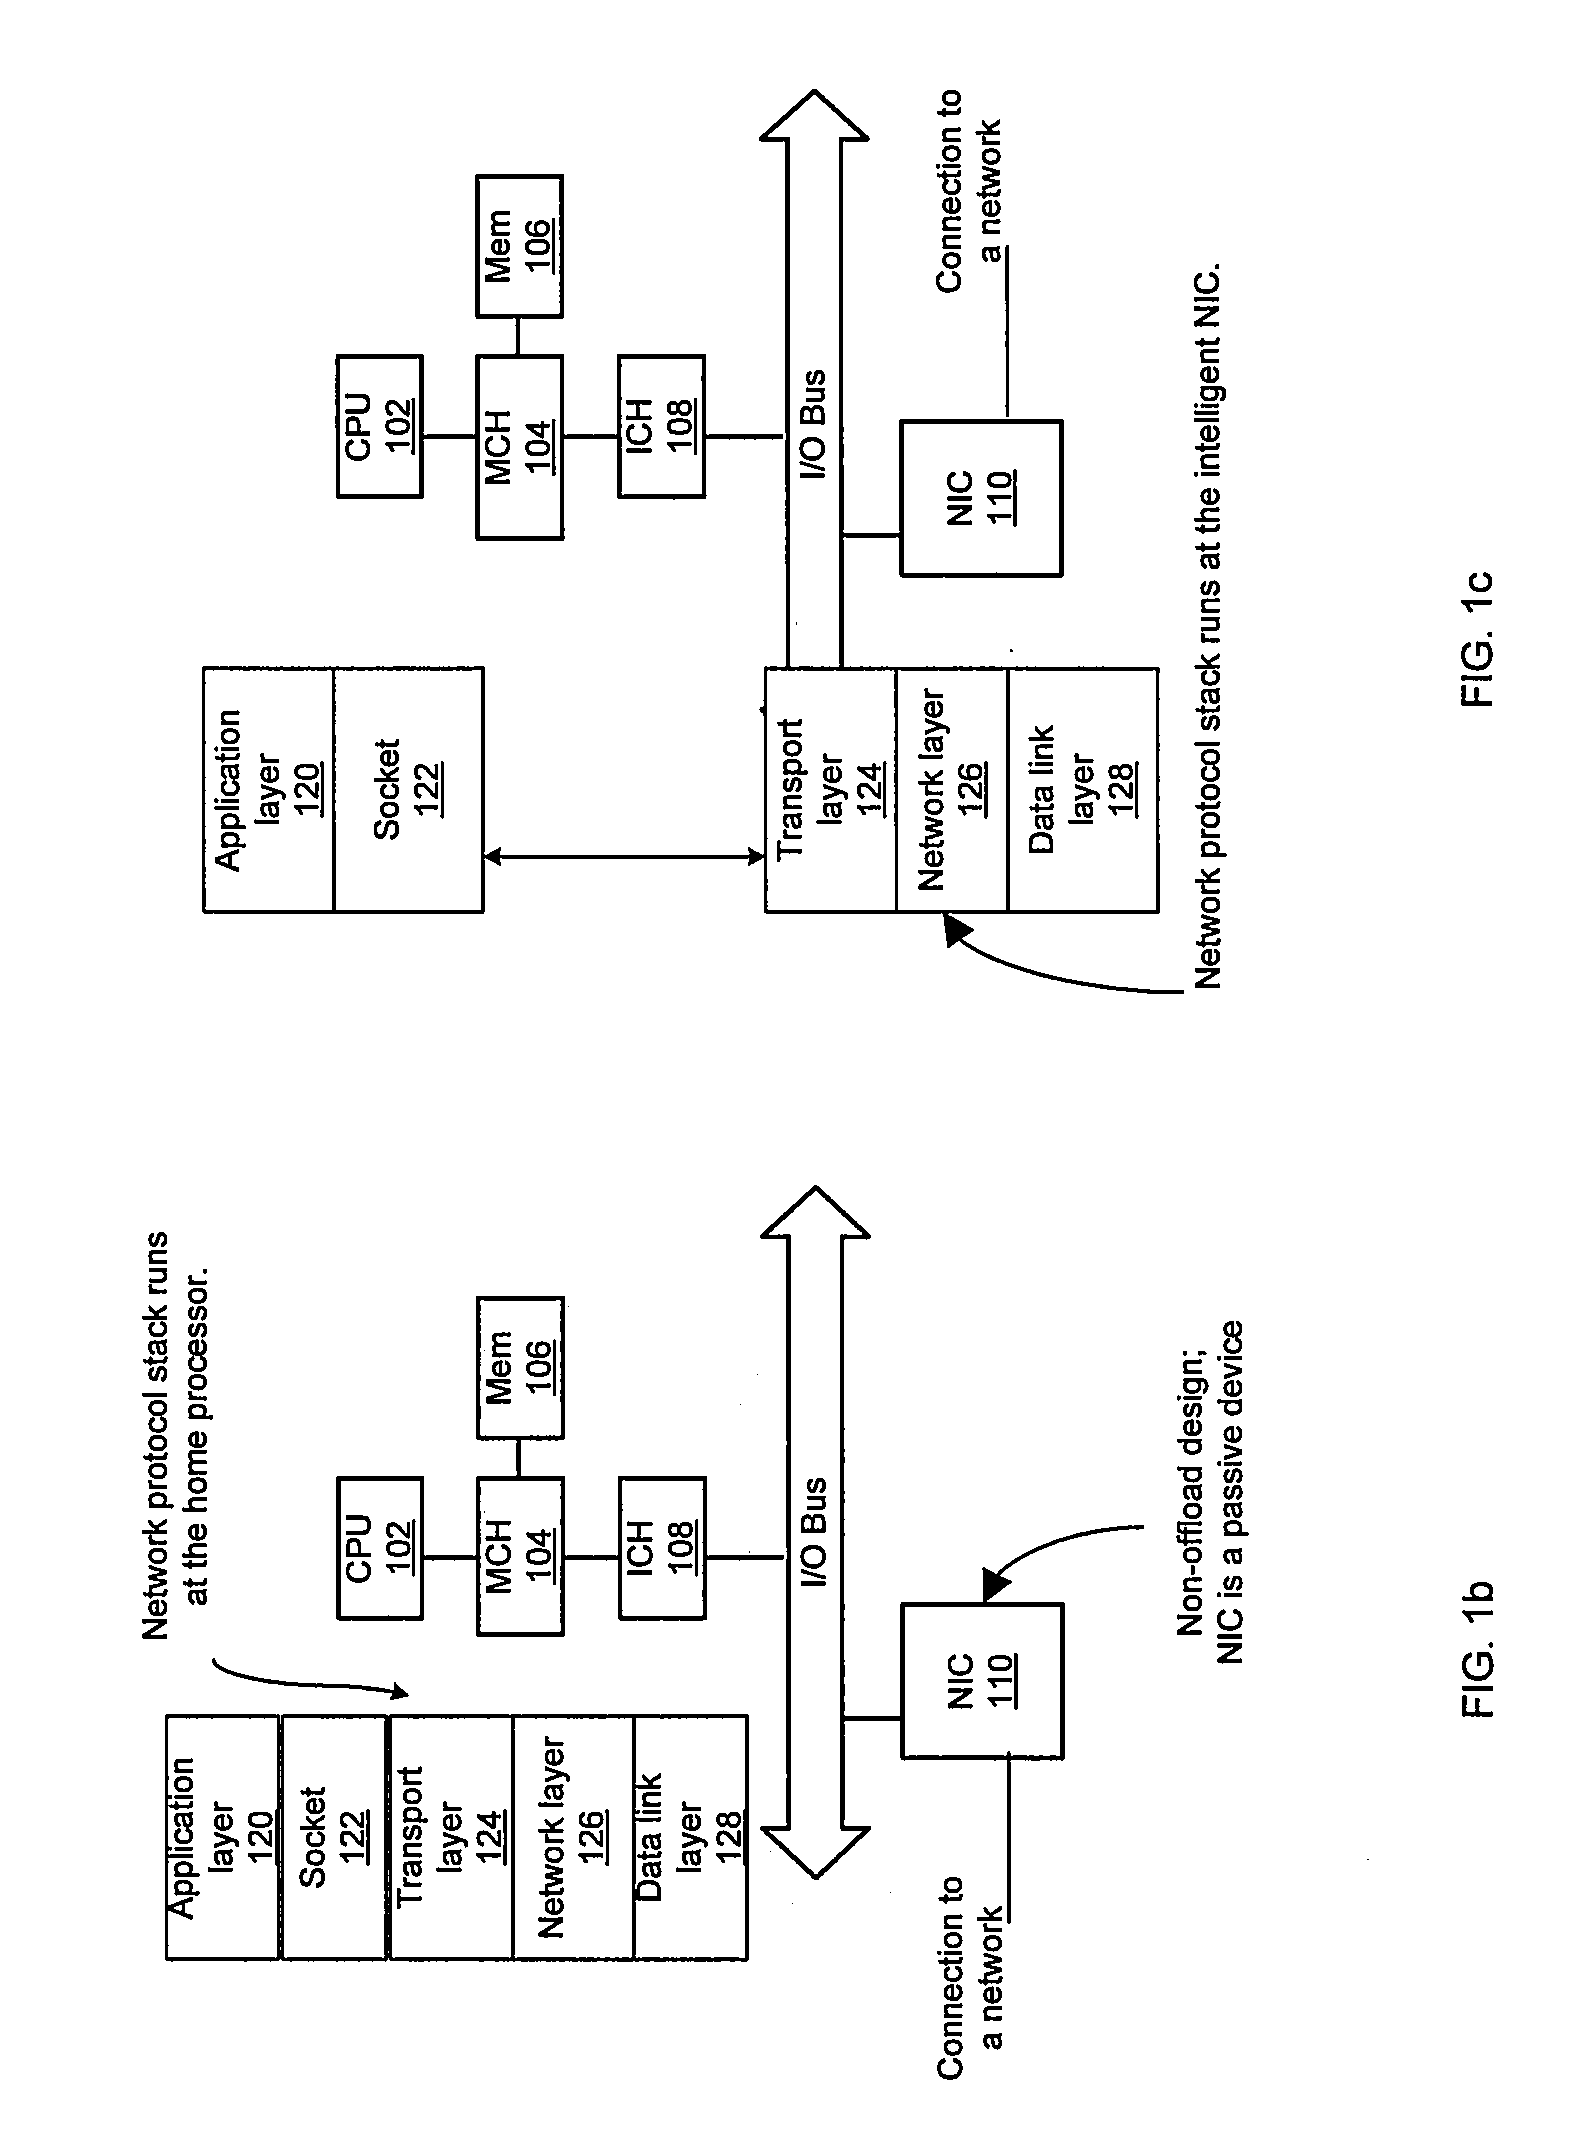 Method and System for a Fast Drop Recovery for a TCP Connection